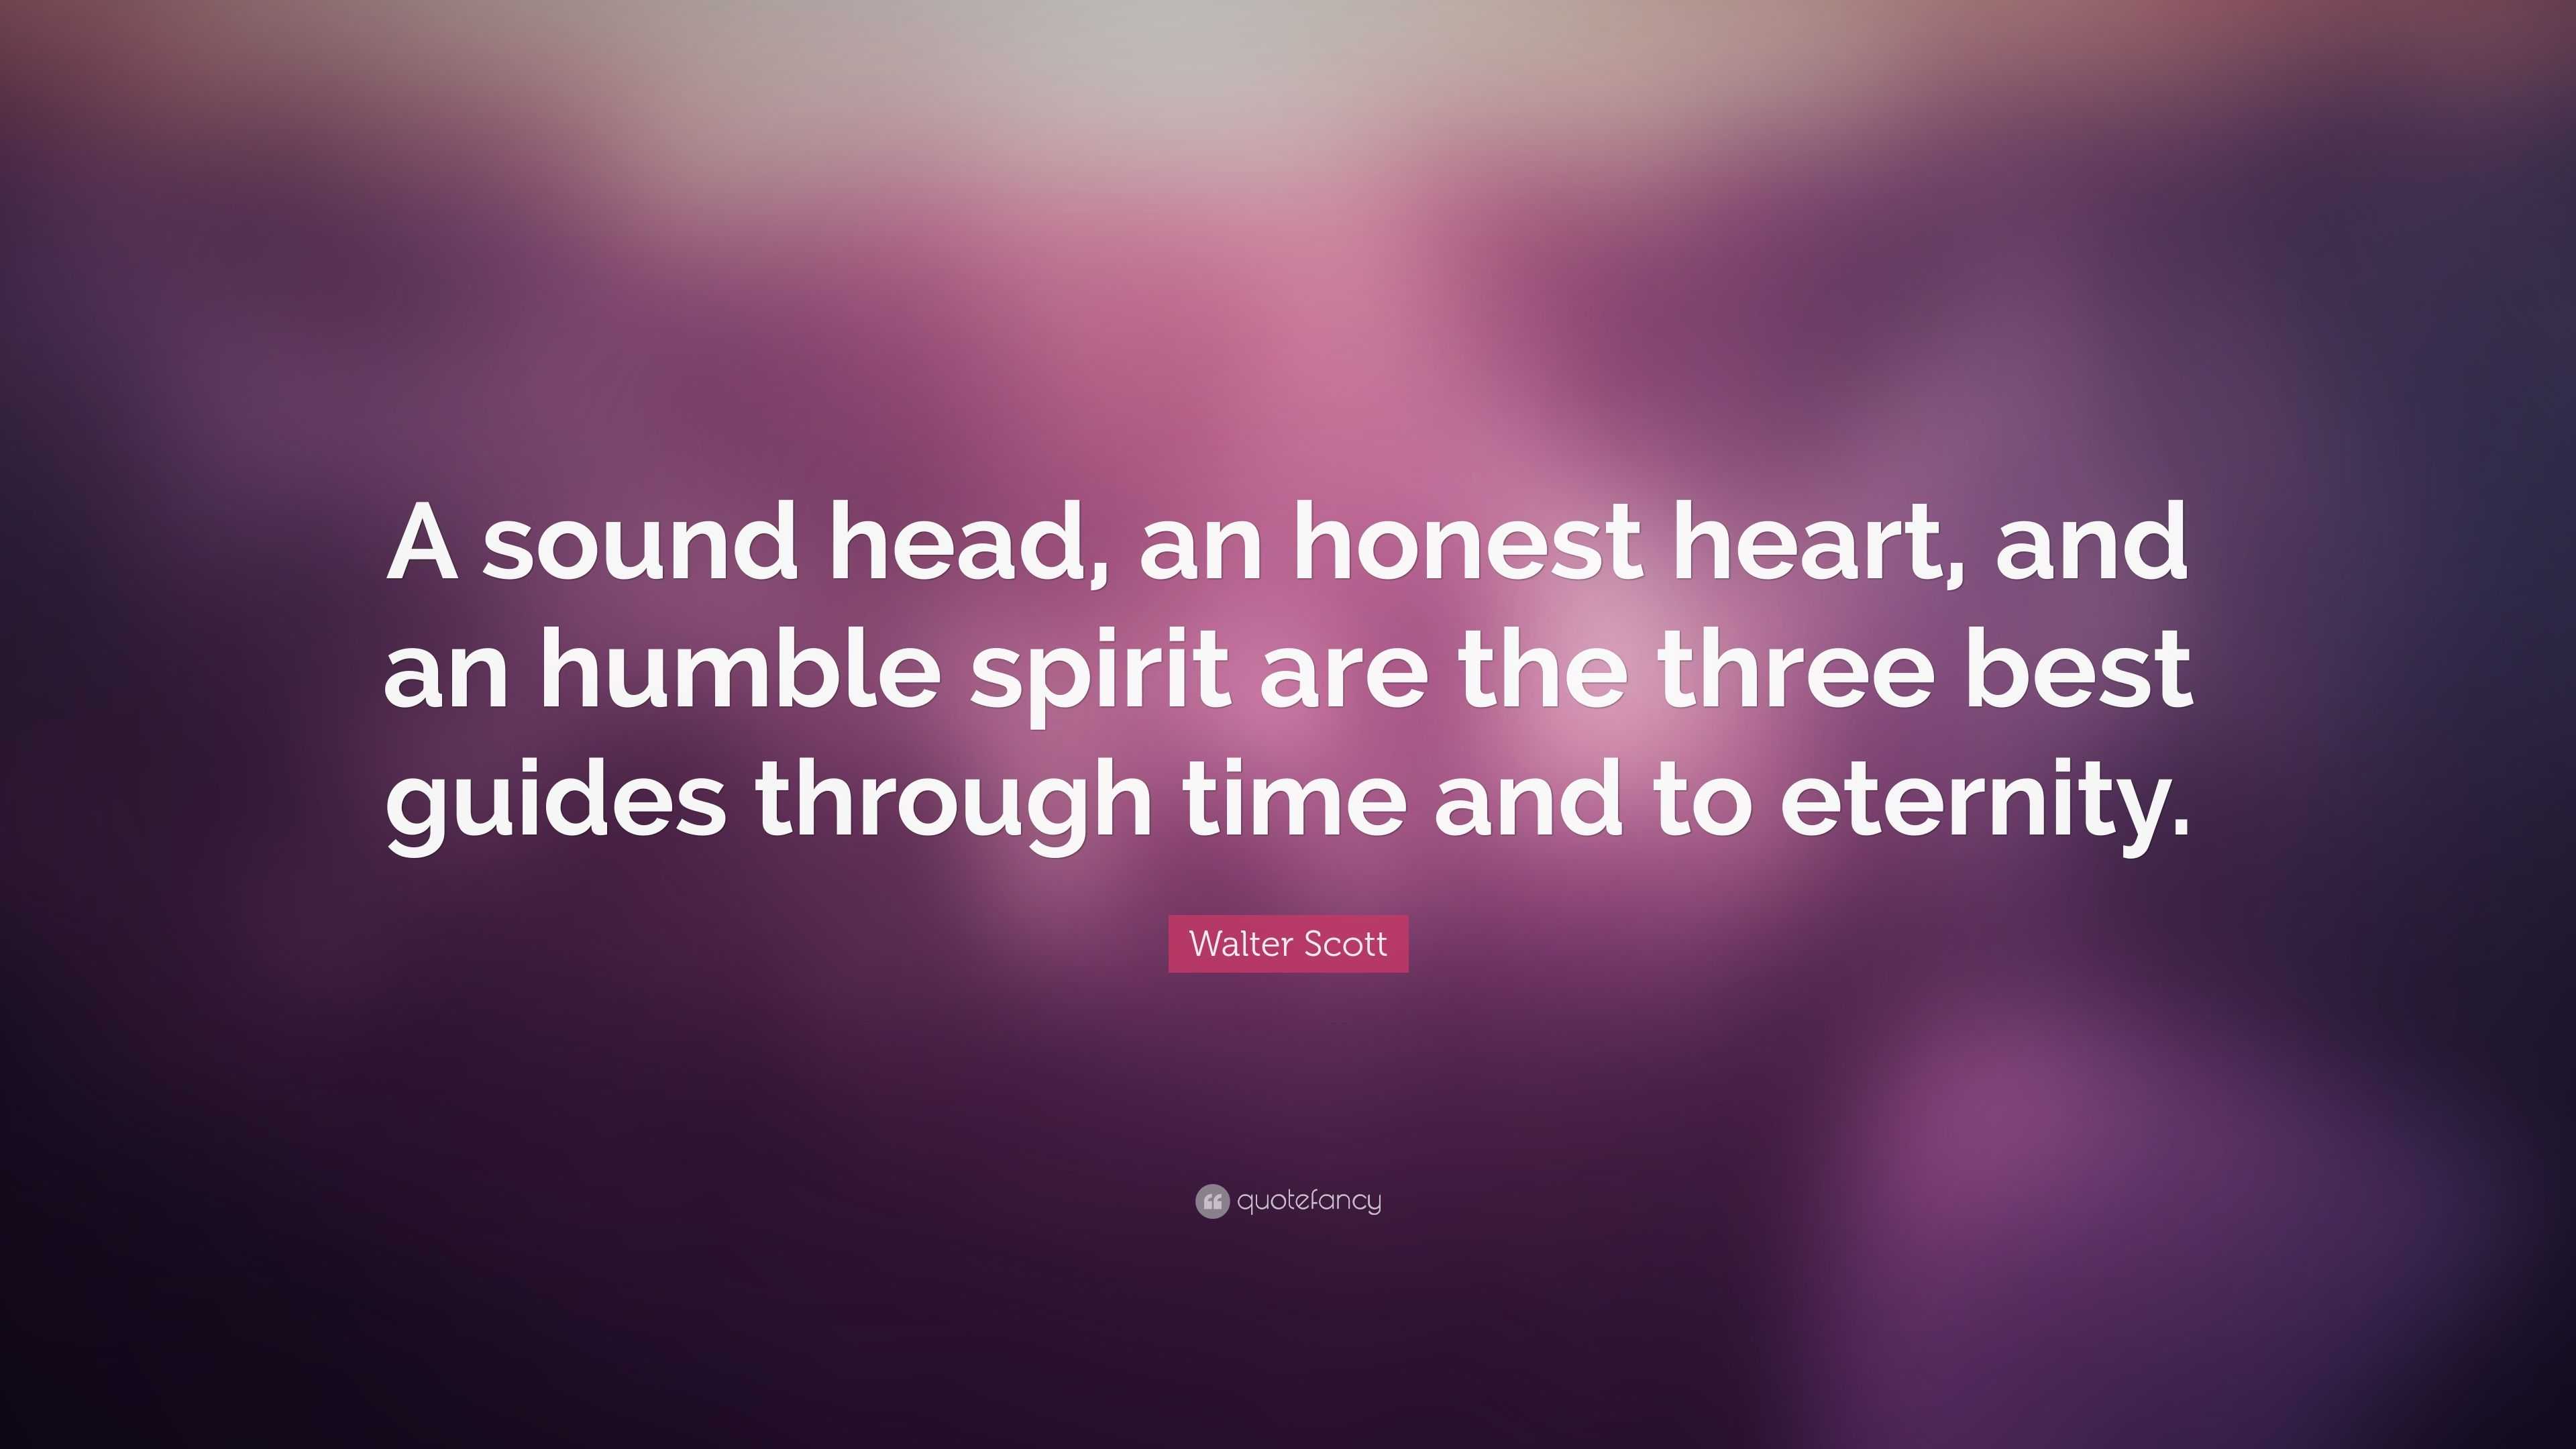 Walter Scott Quote: “a Sound Head, An Honest Heart, And An Humble 